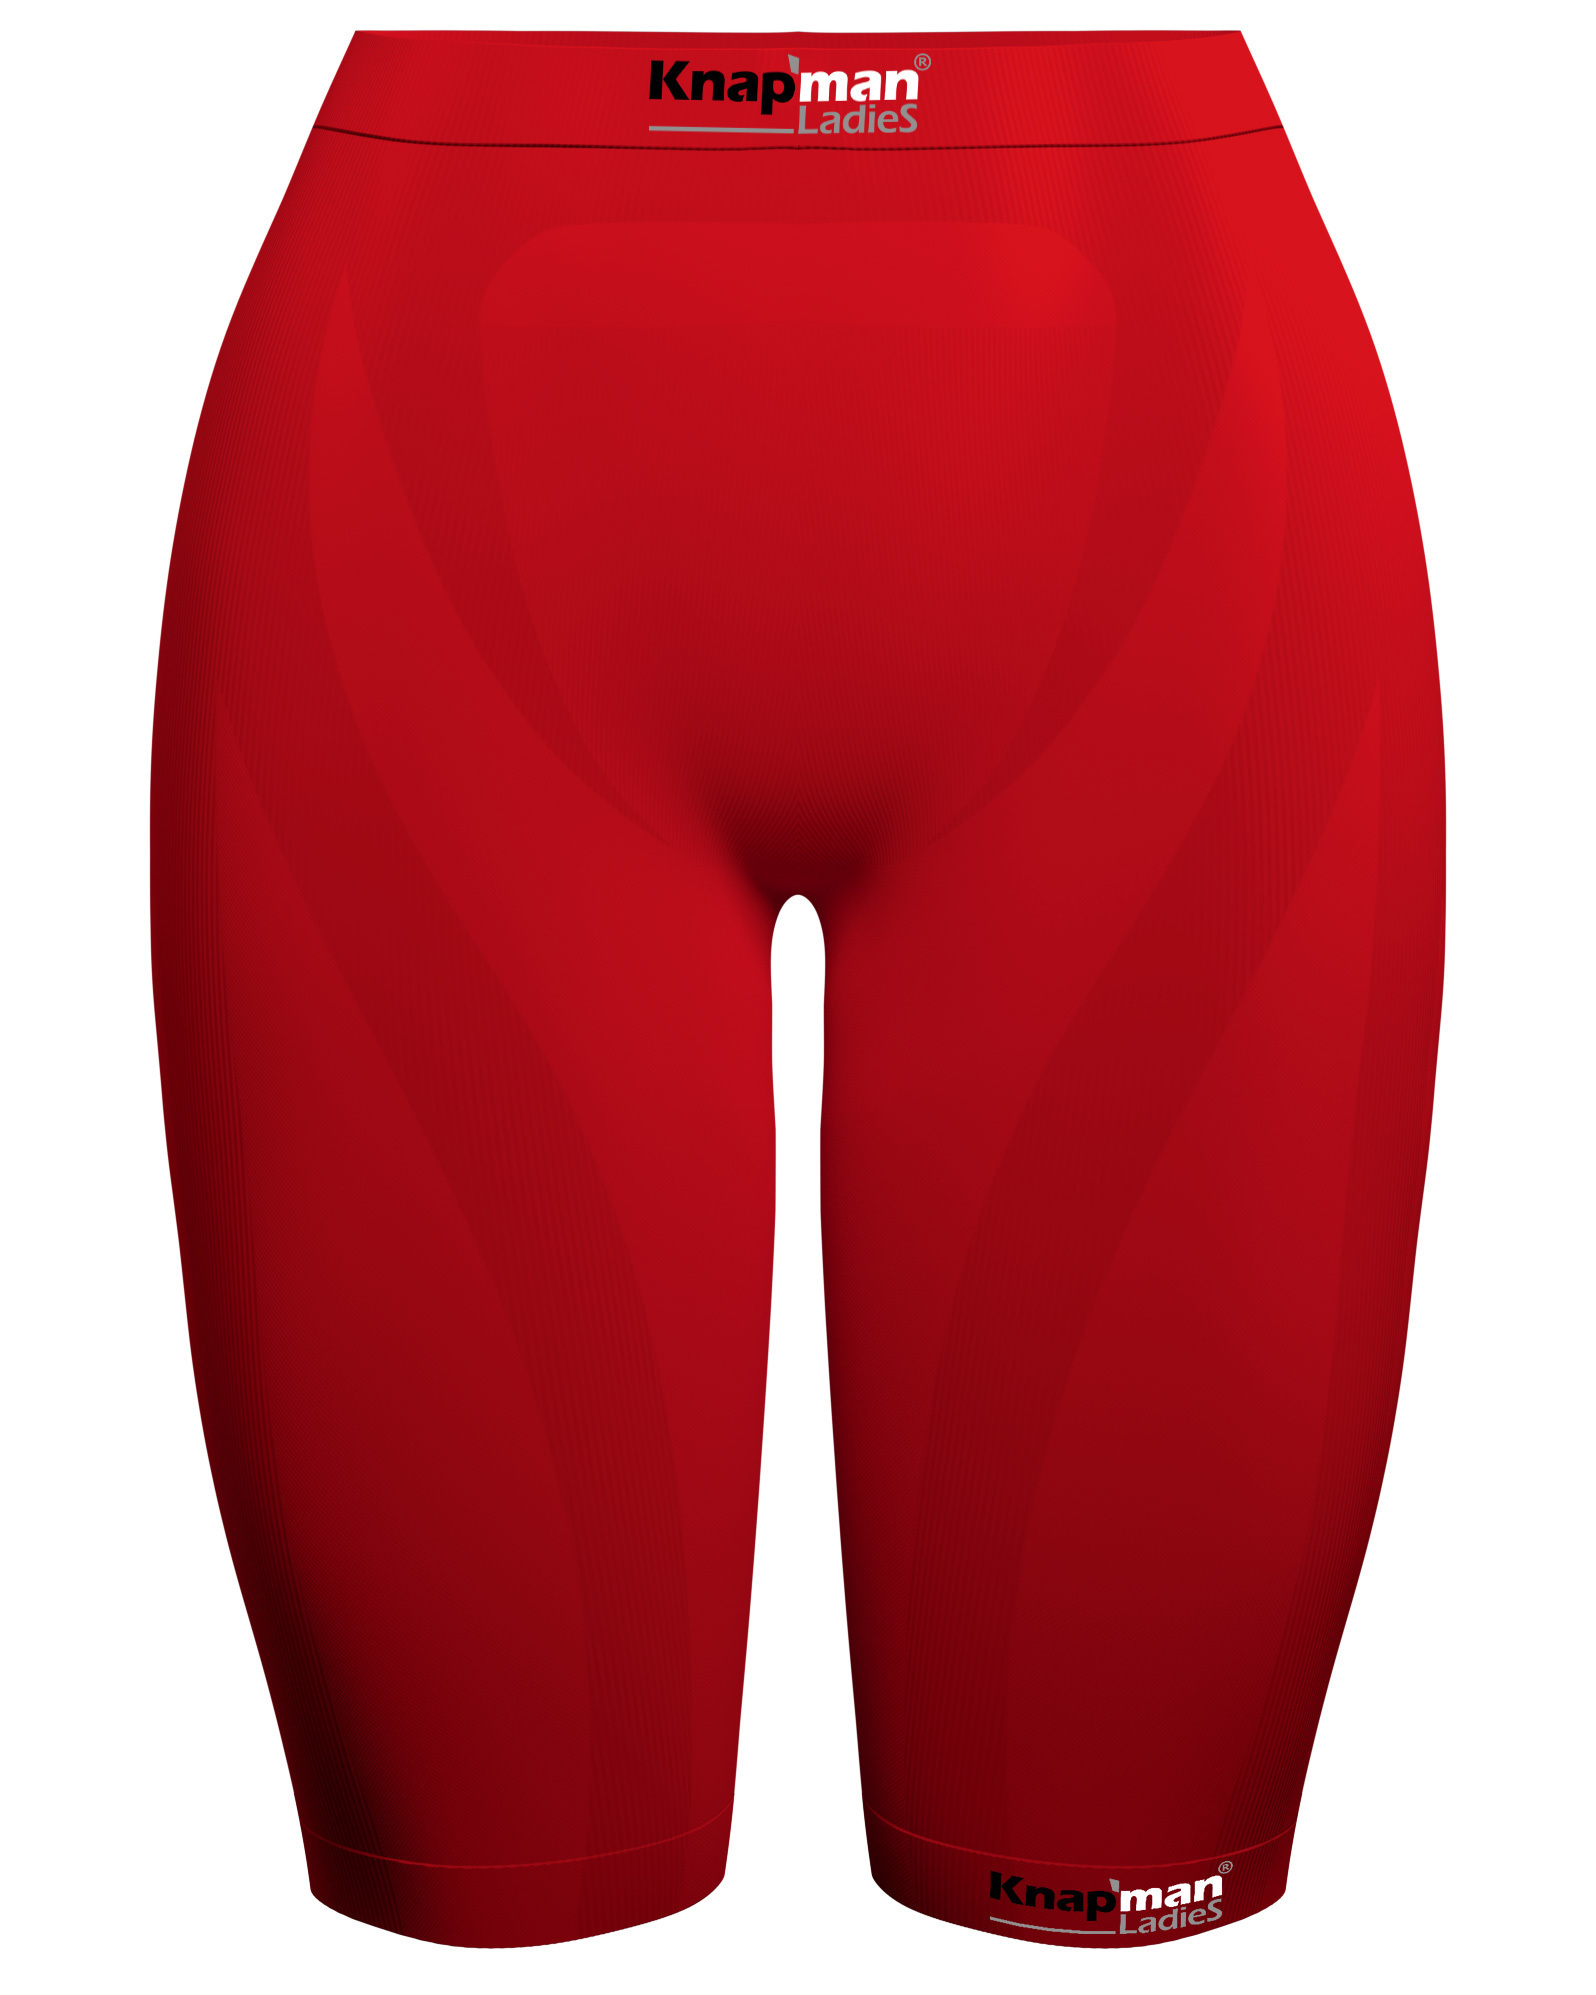 Knap'man Ladies Zoned Compression Short 45% red